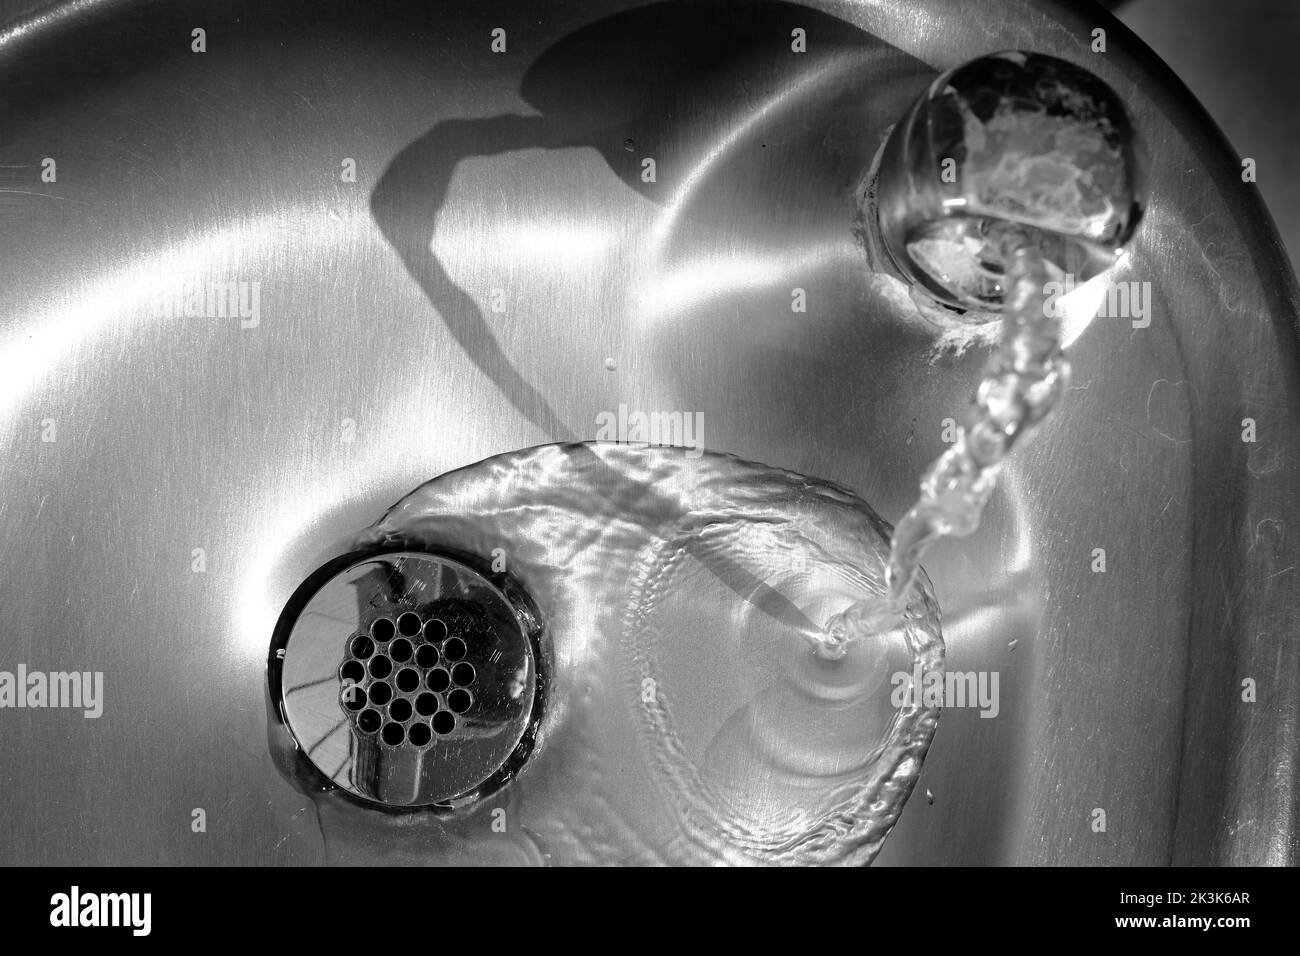 Steel metal shiny sink with water flowing down the drain Stock Photo